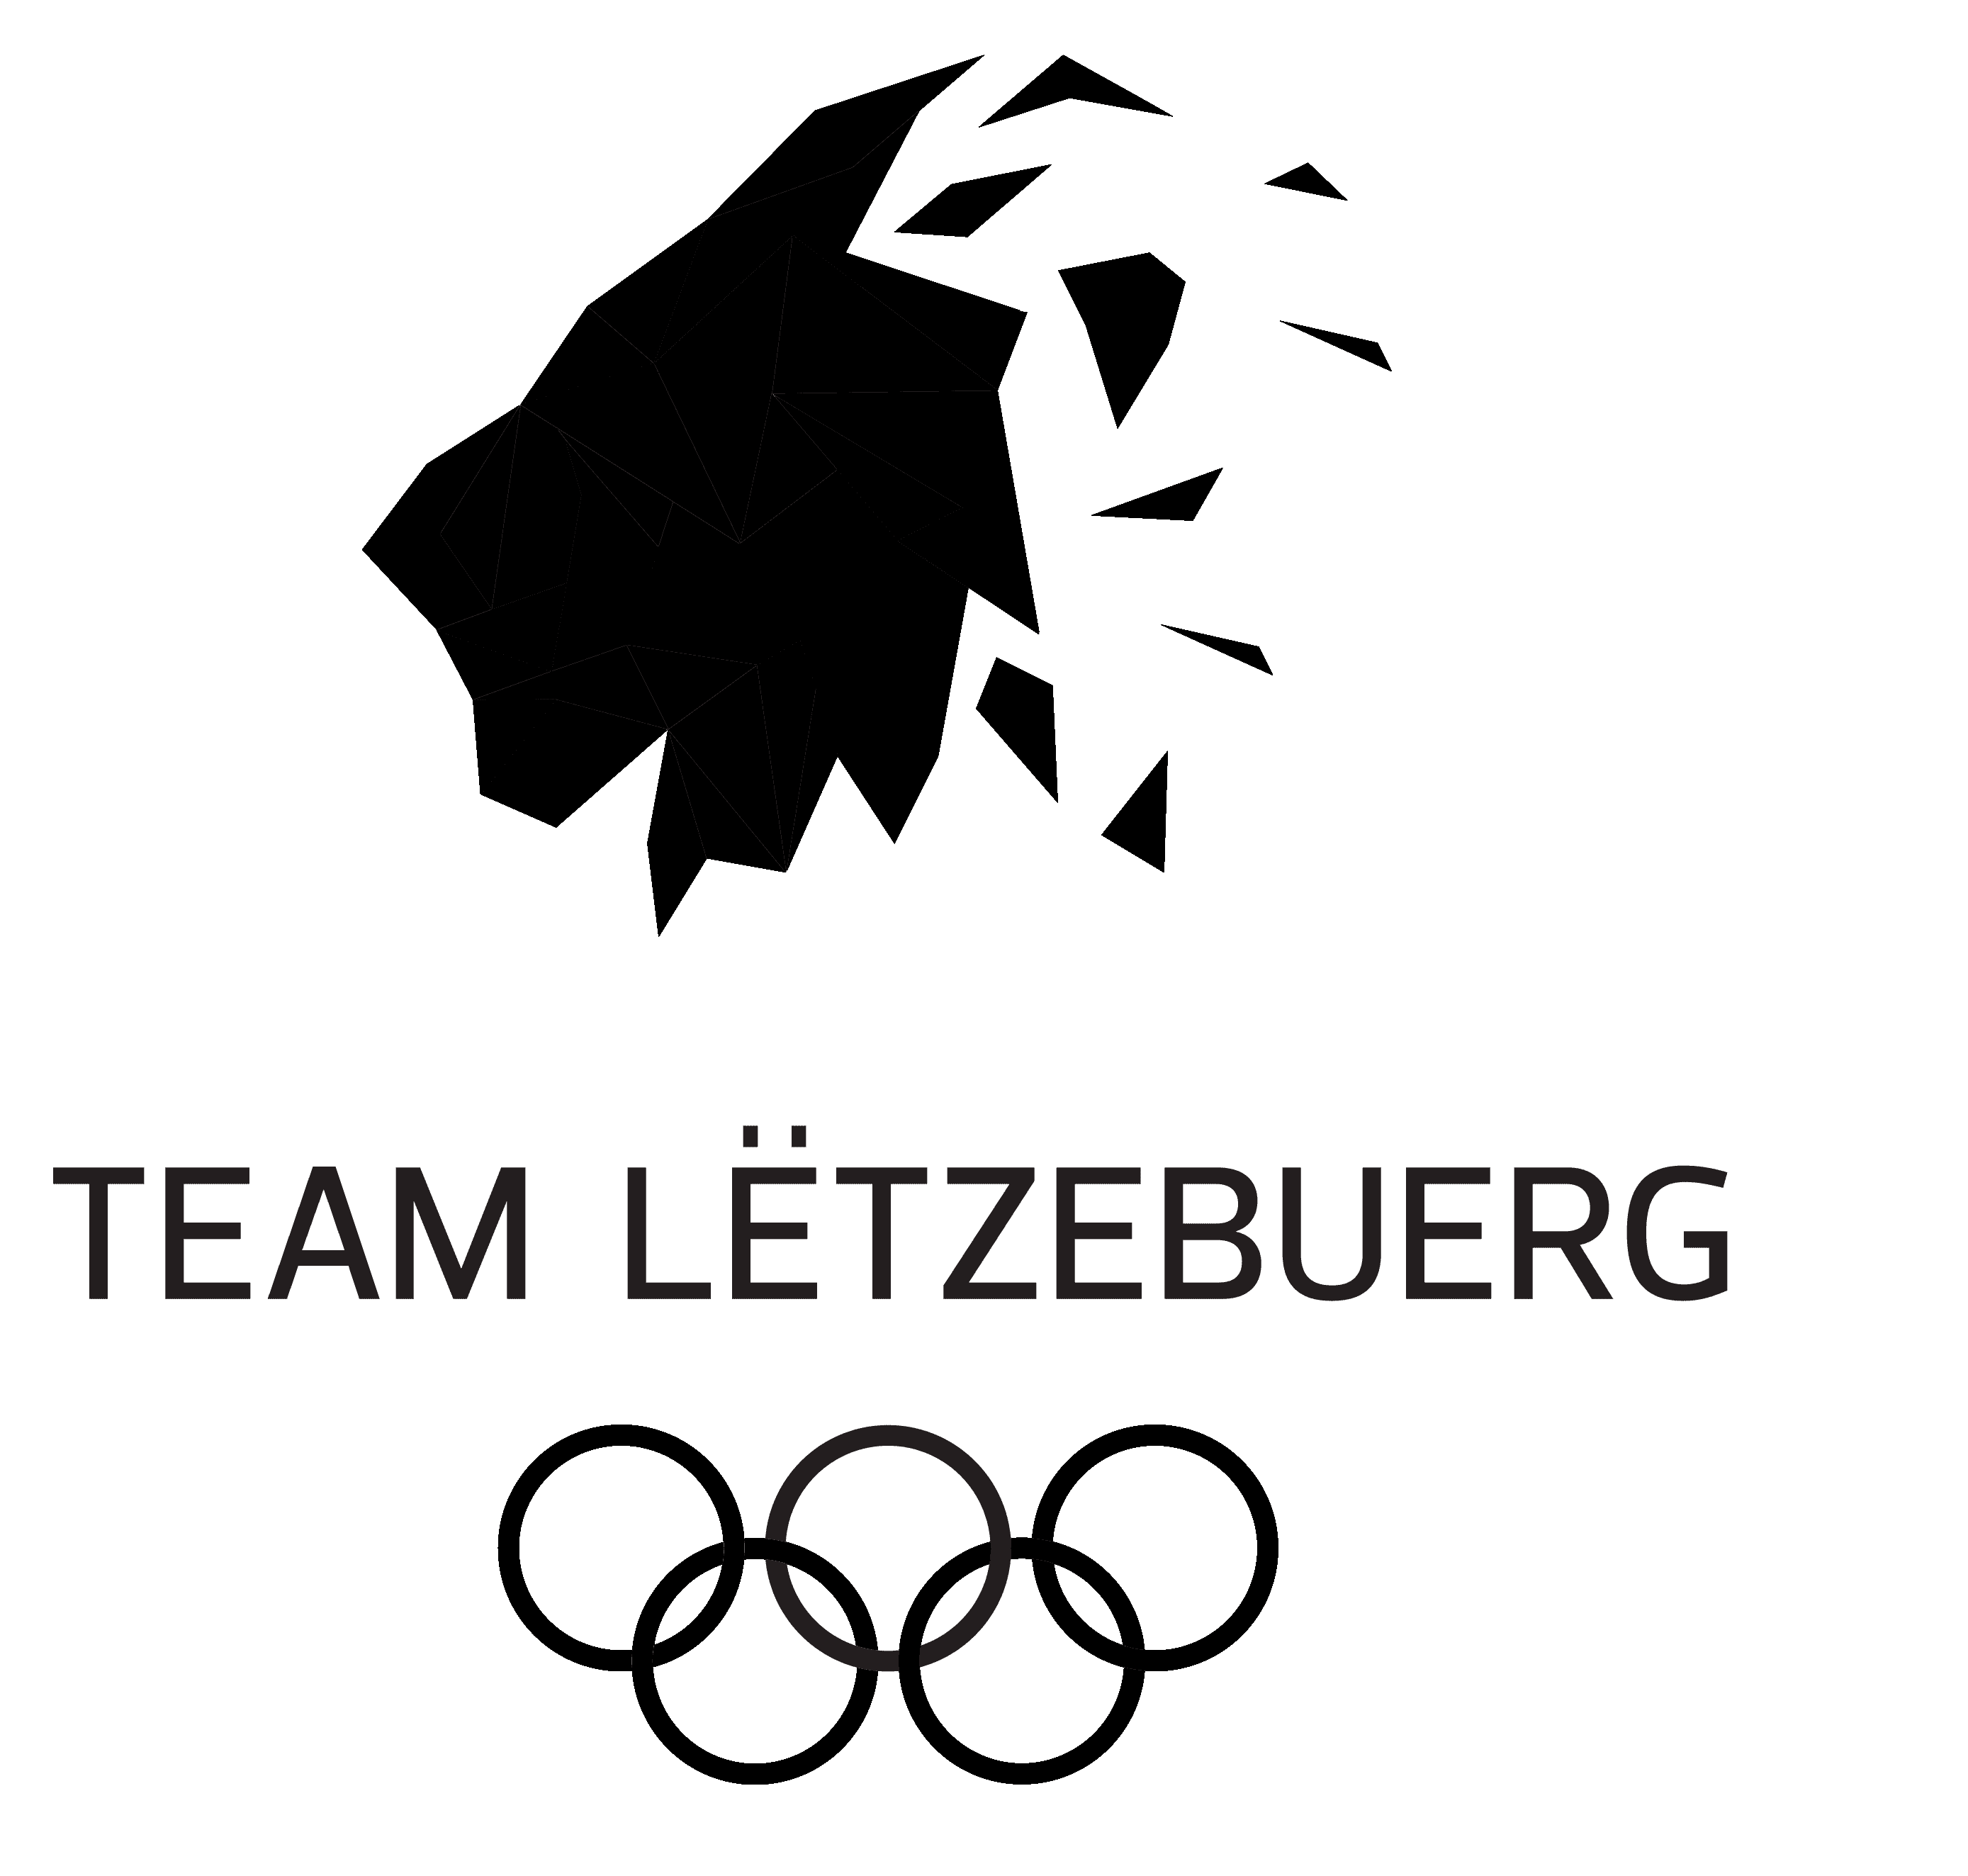 Clients and friends - Team Letzebuerg